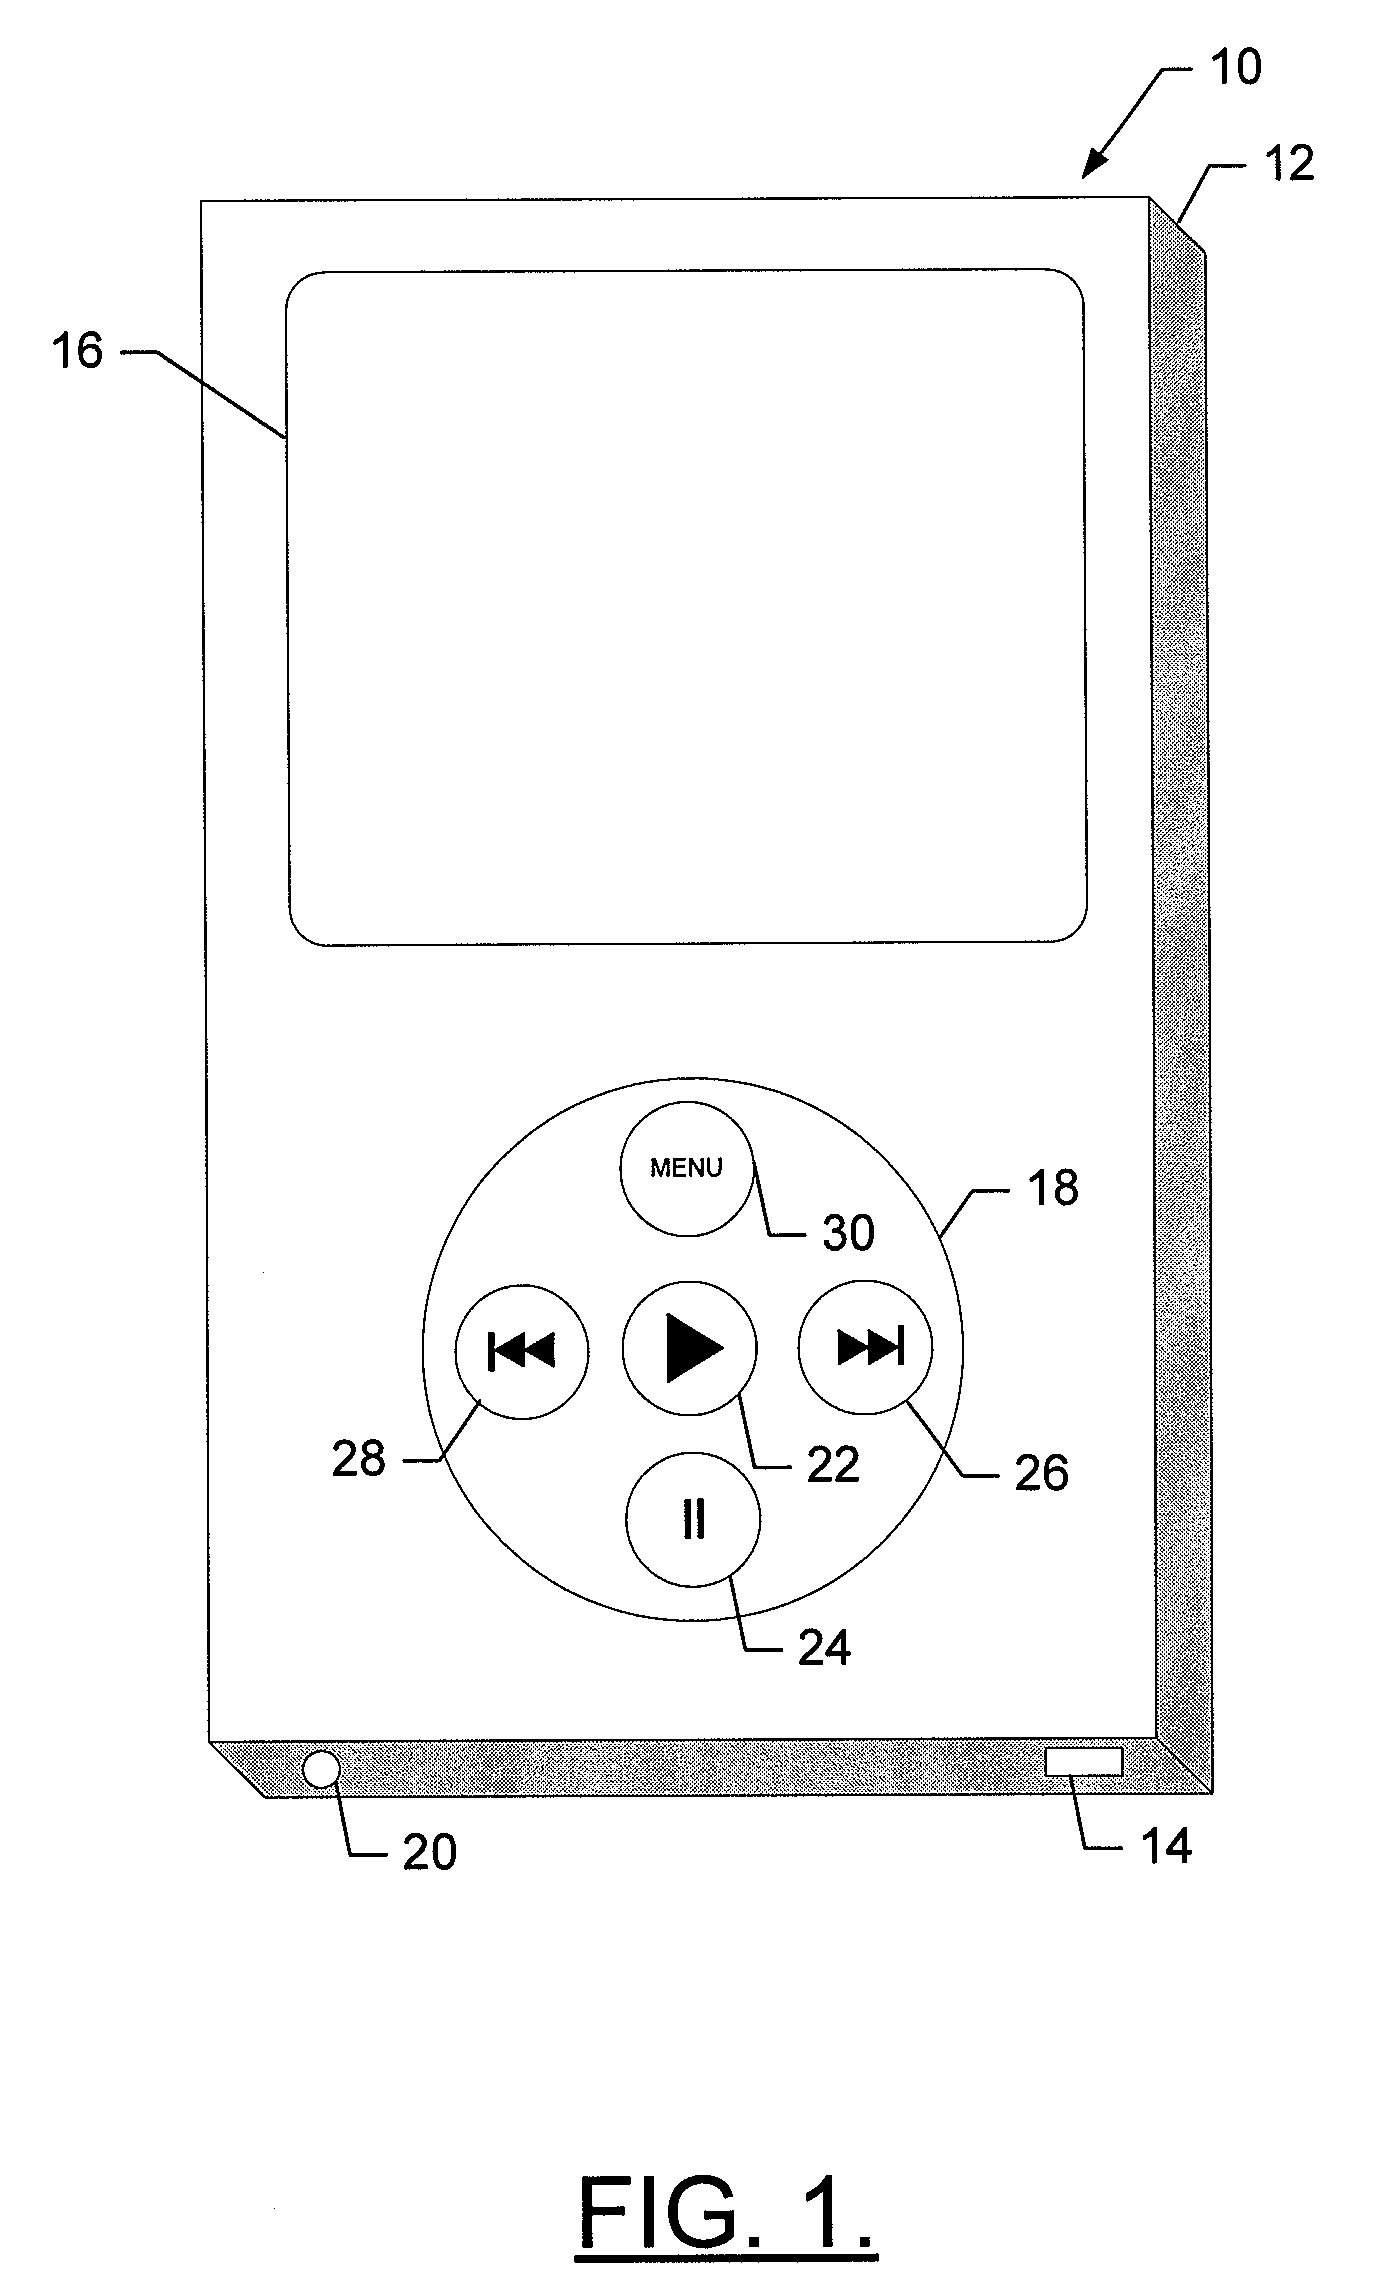 Method, apparatus and computer program product for presenting a media history